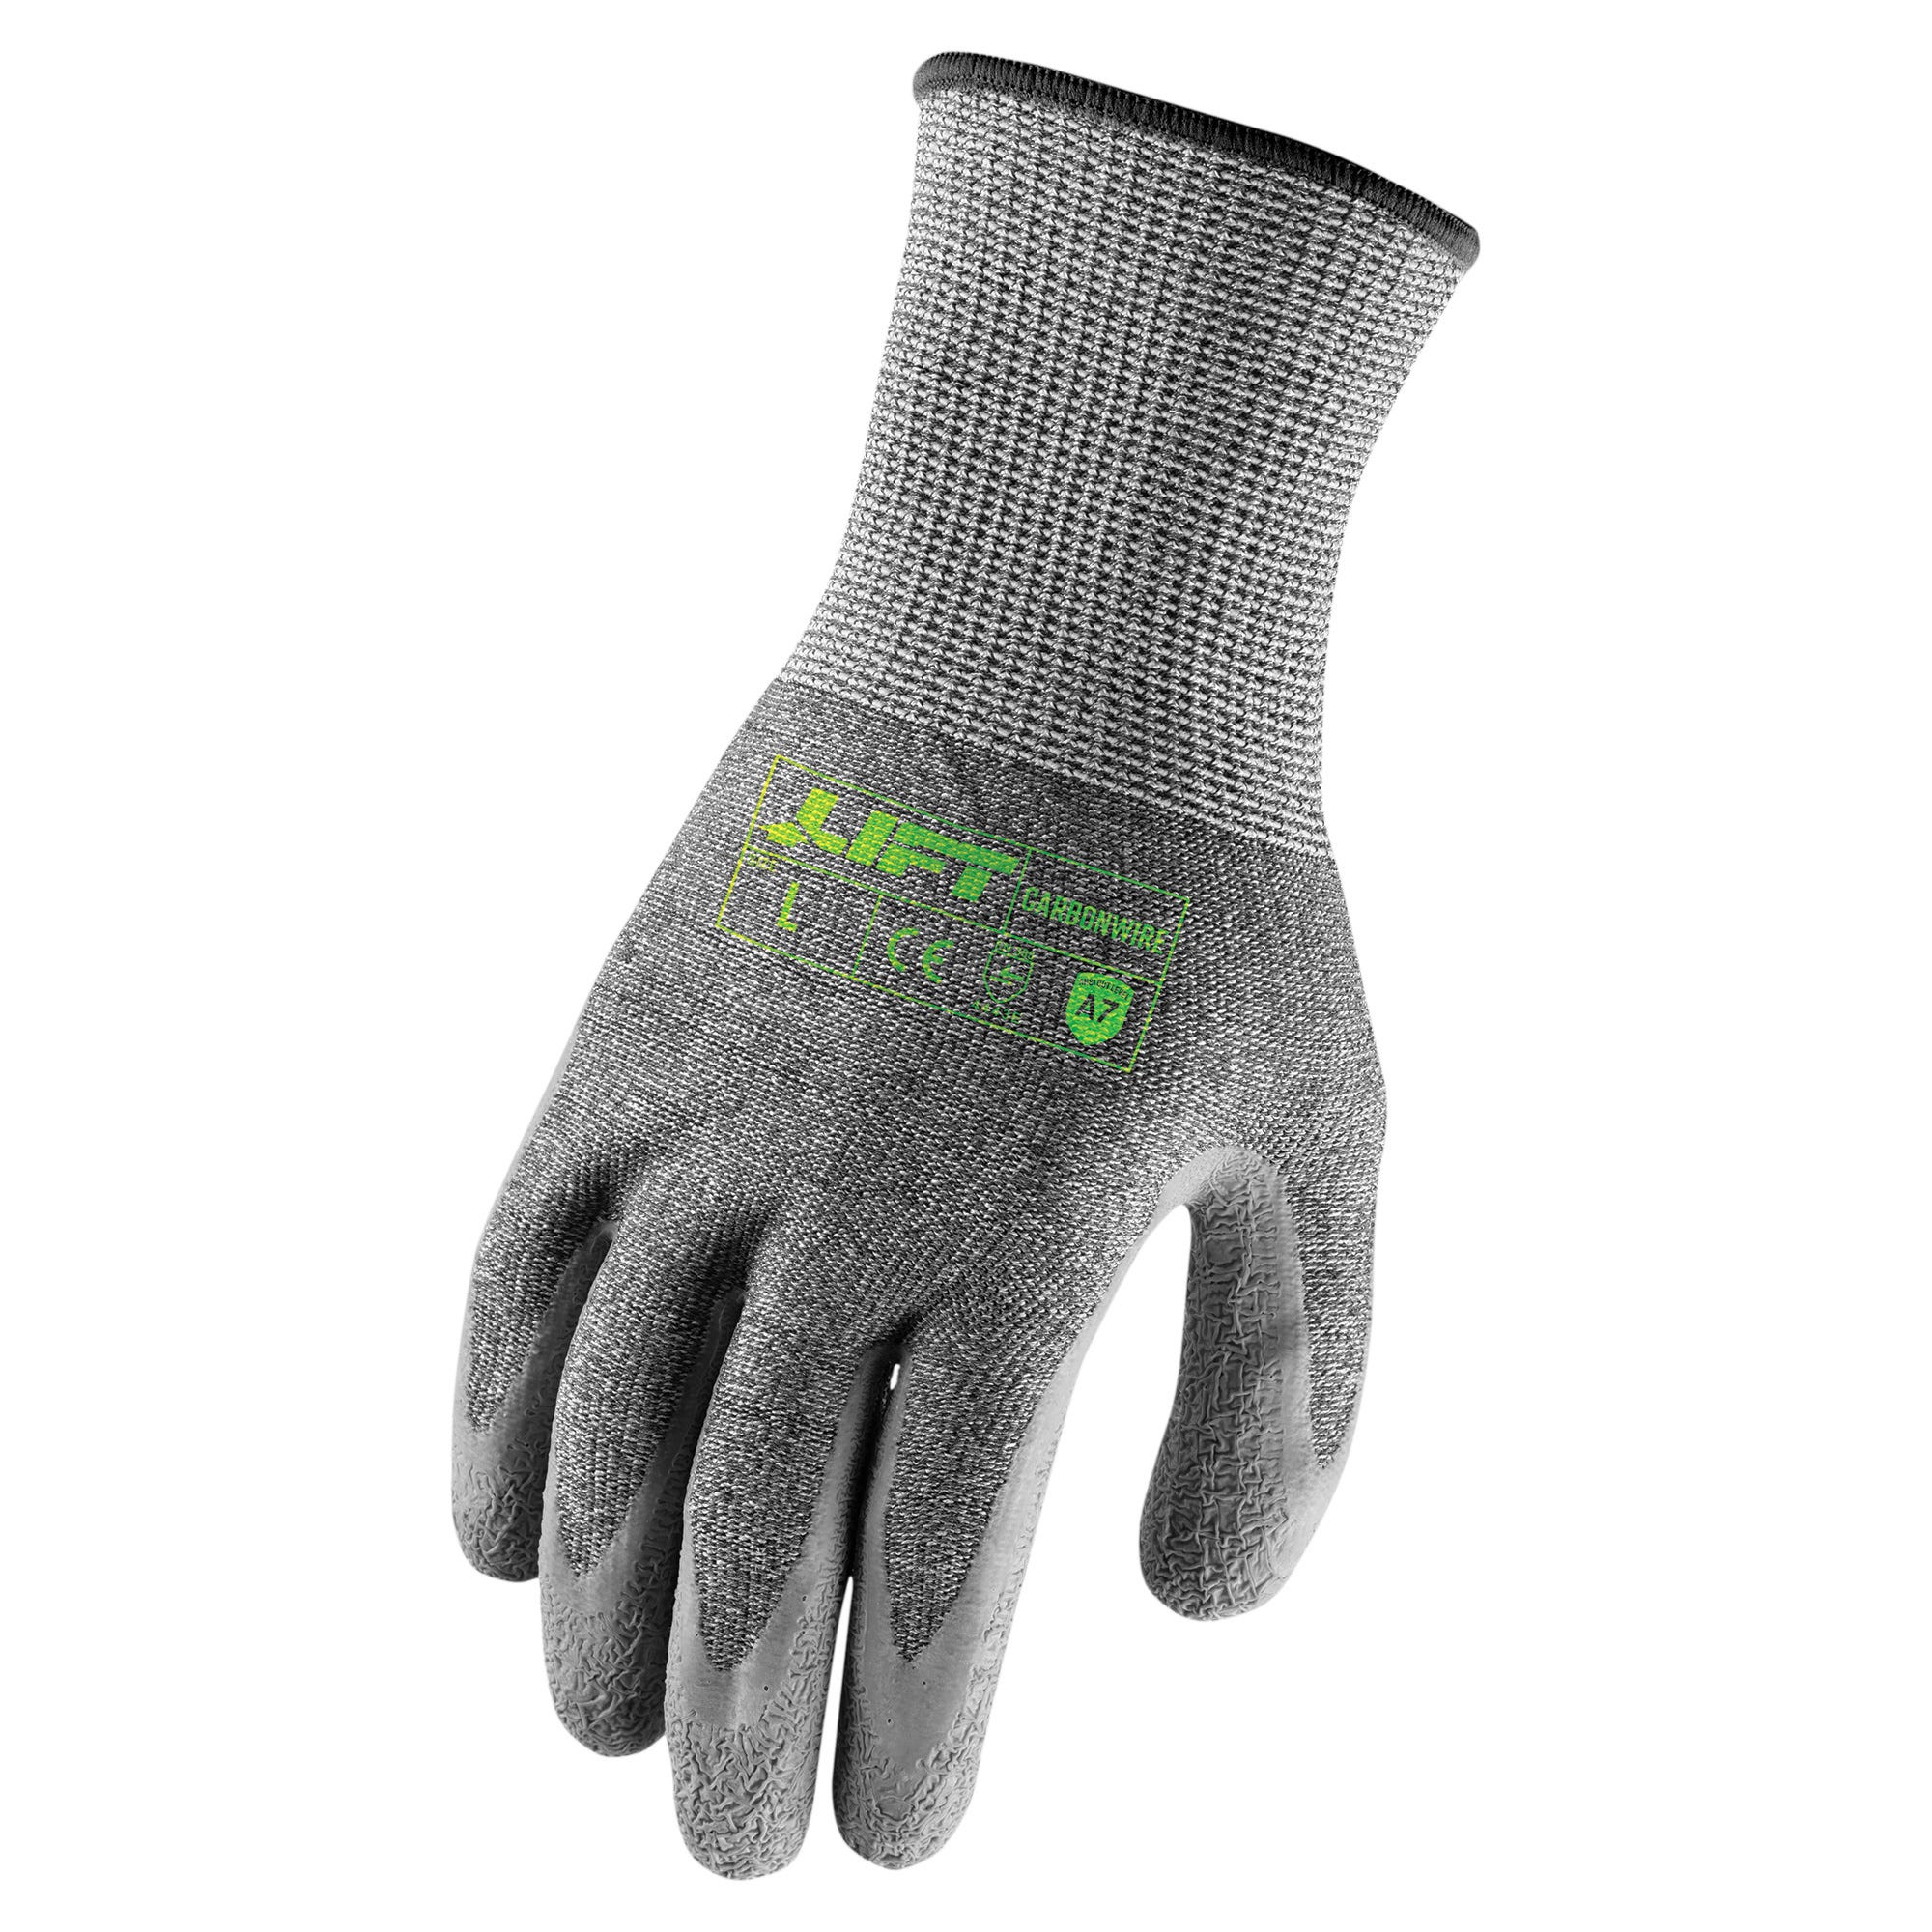 Gants de protection anti coupure LIFT SAFETY CARBONWIRE A7 LATEX CRINKLE XL 0